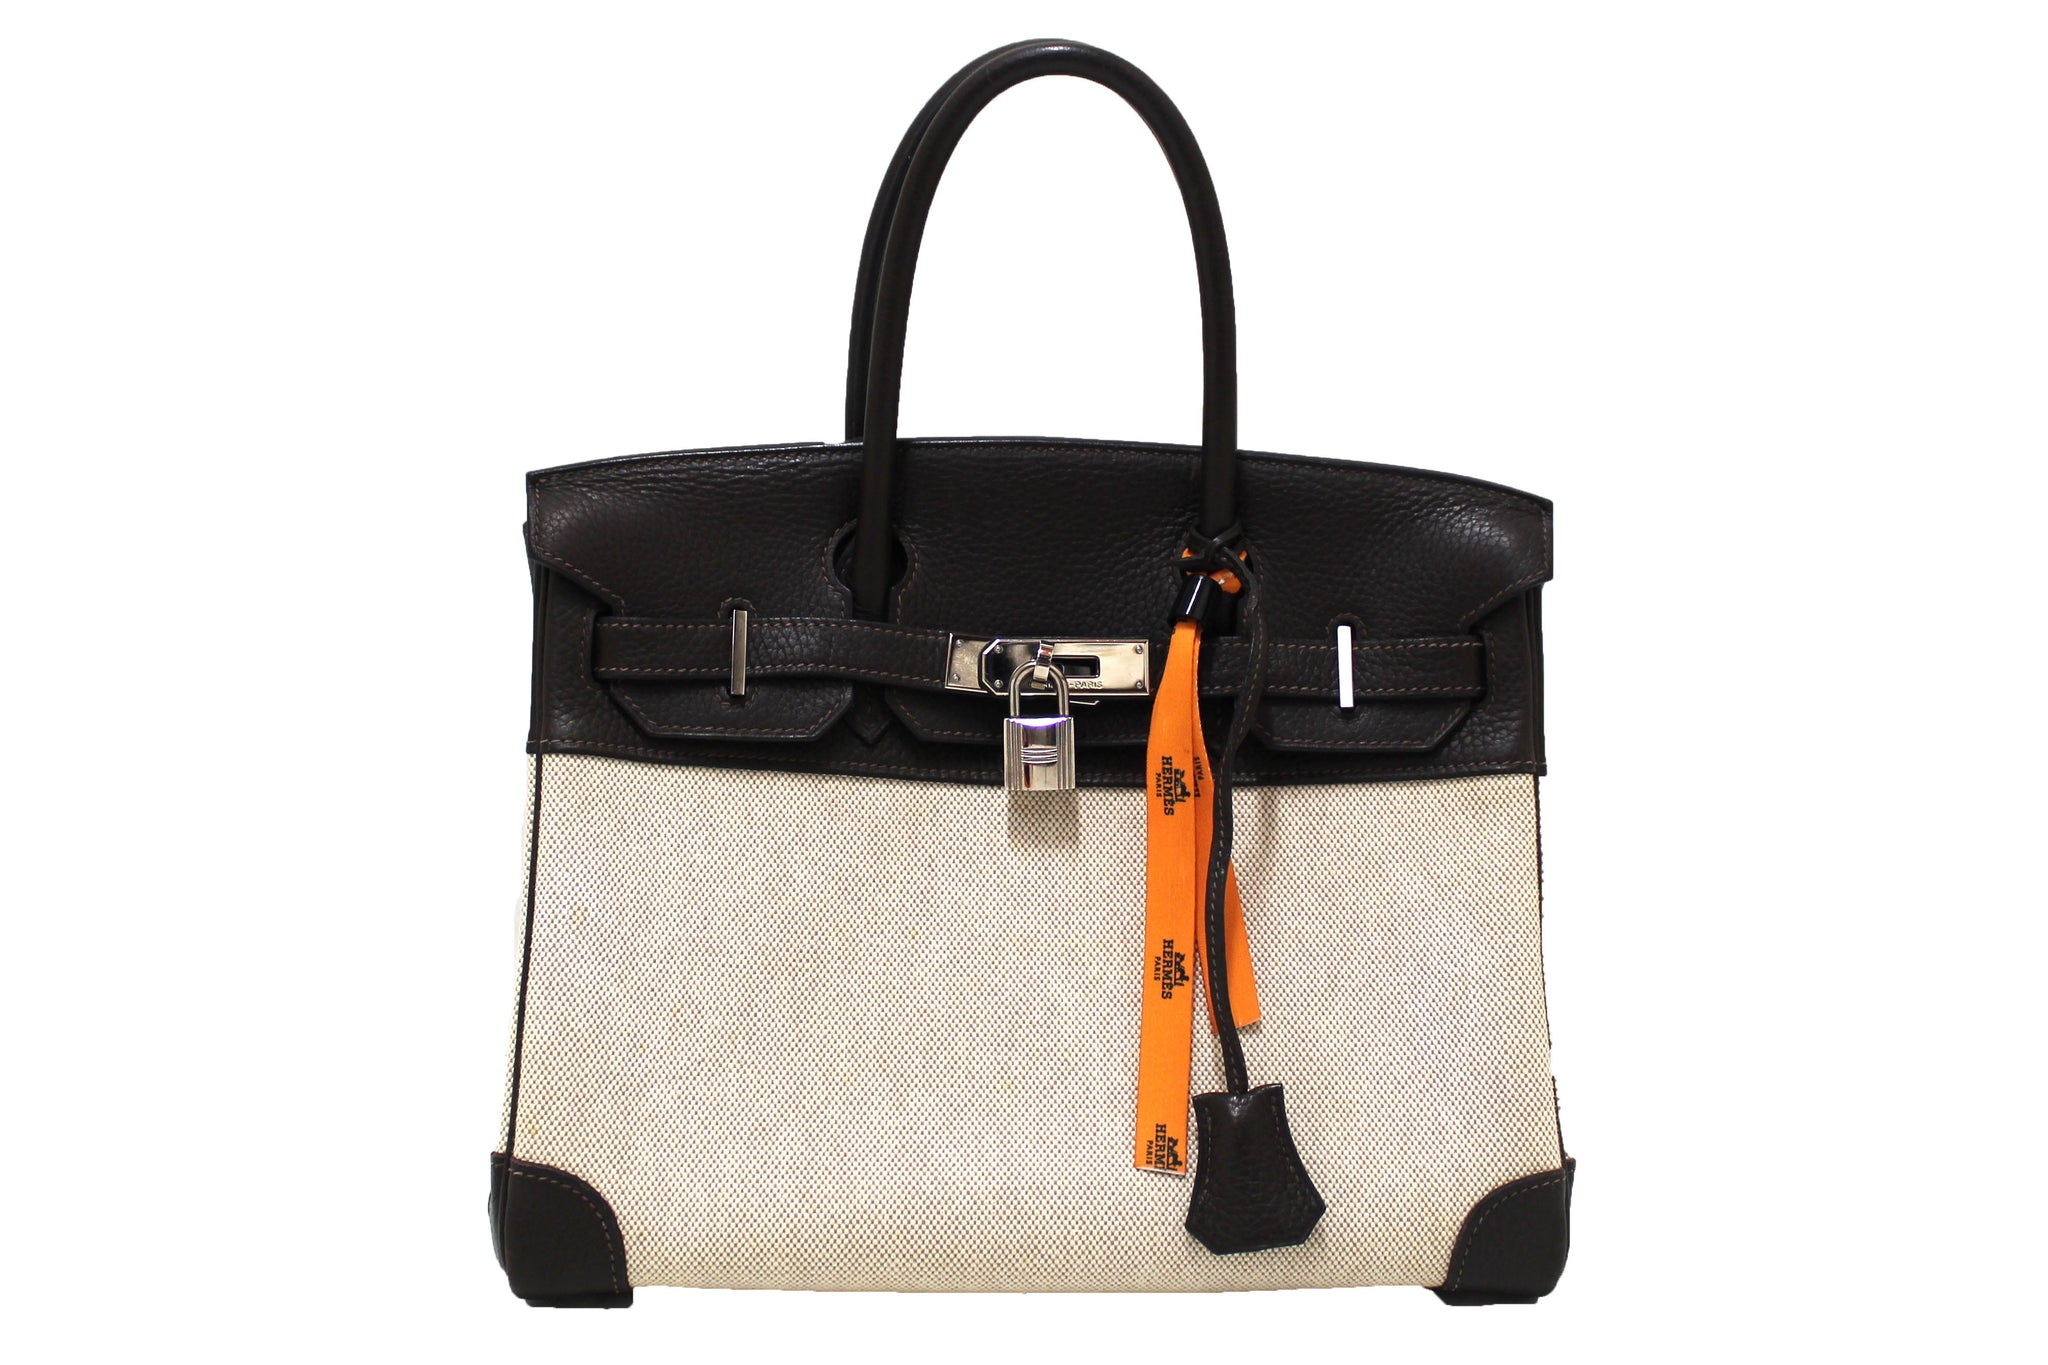 Hermes Brown Togo Leather and Toile Canvas Birkin 30 Bag – Italy